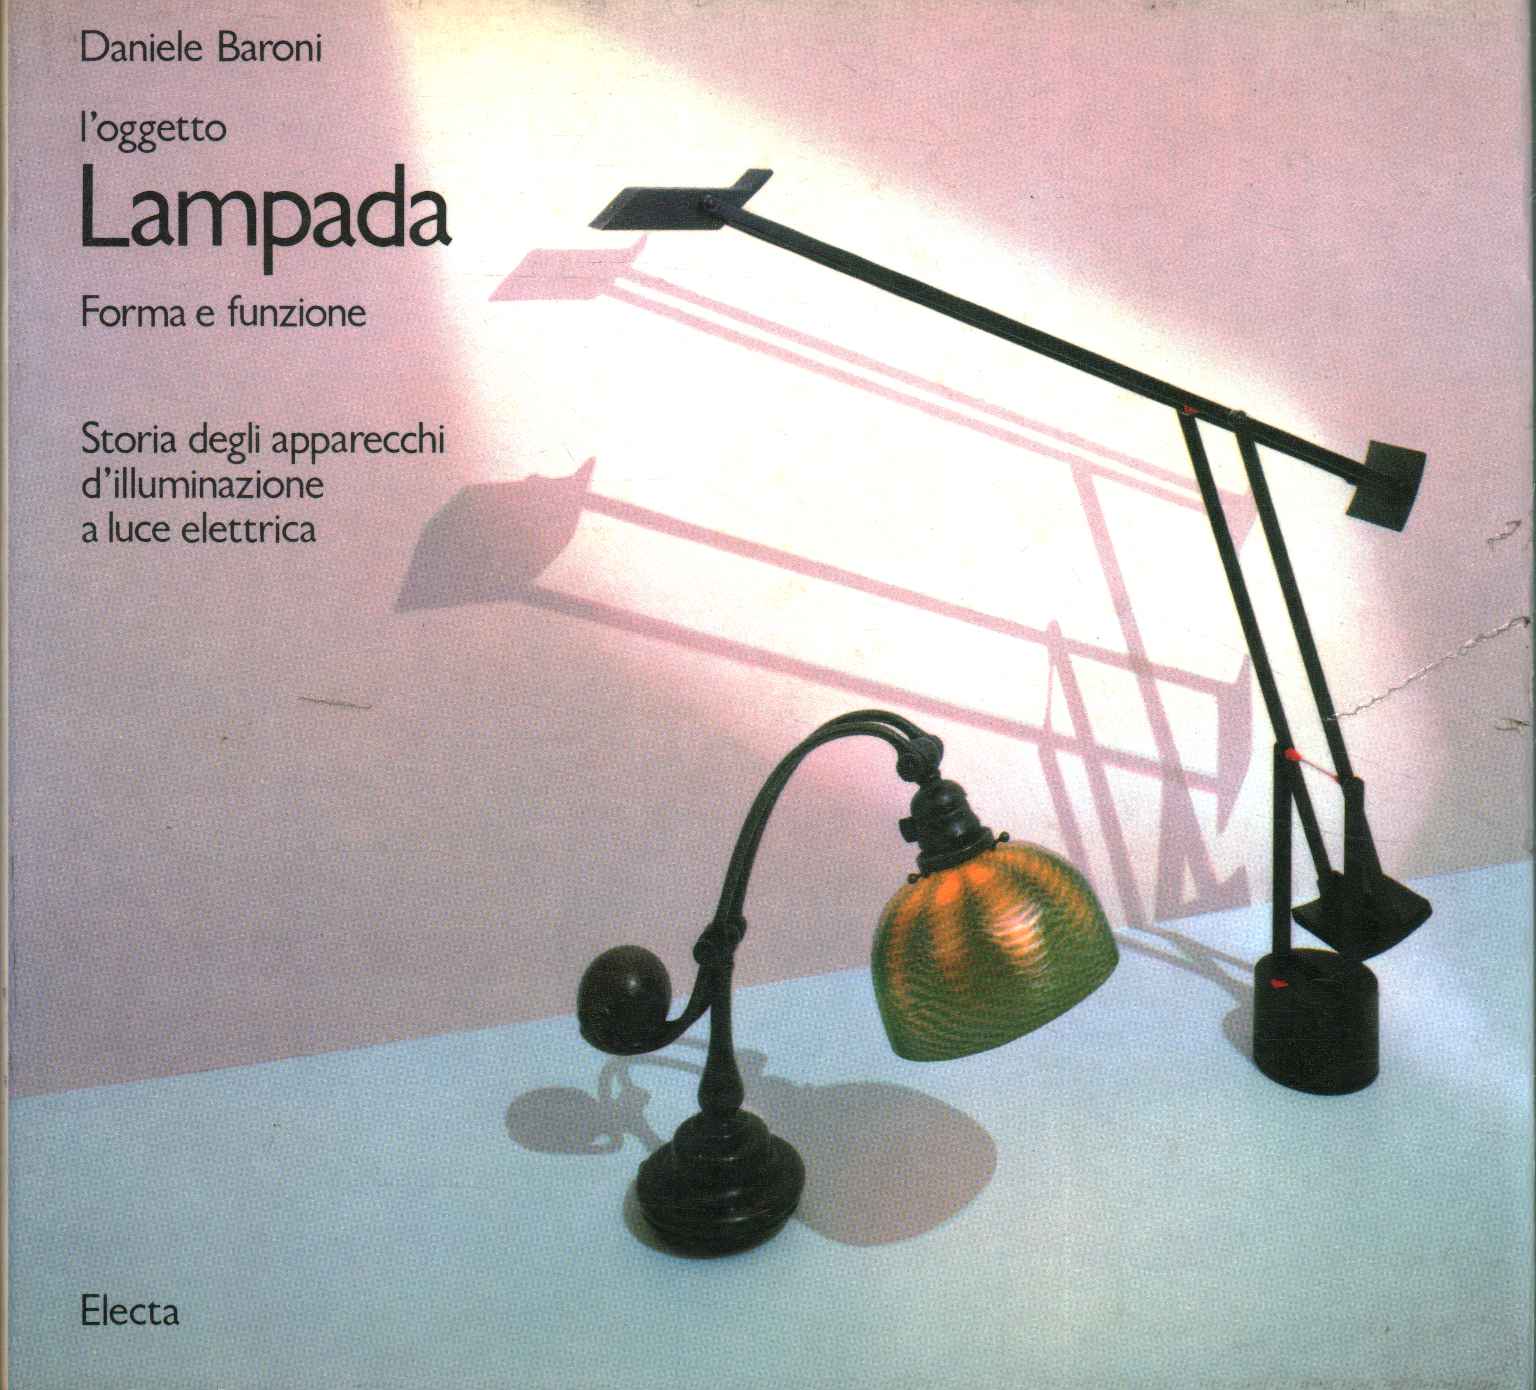 Lamp,The lamp object. Form and function